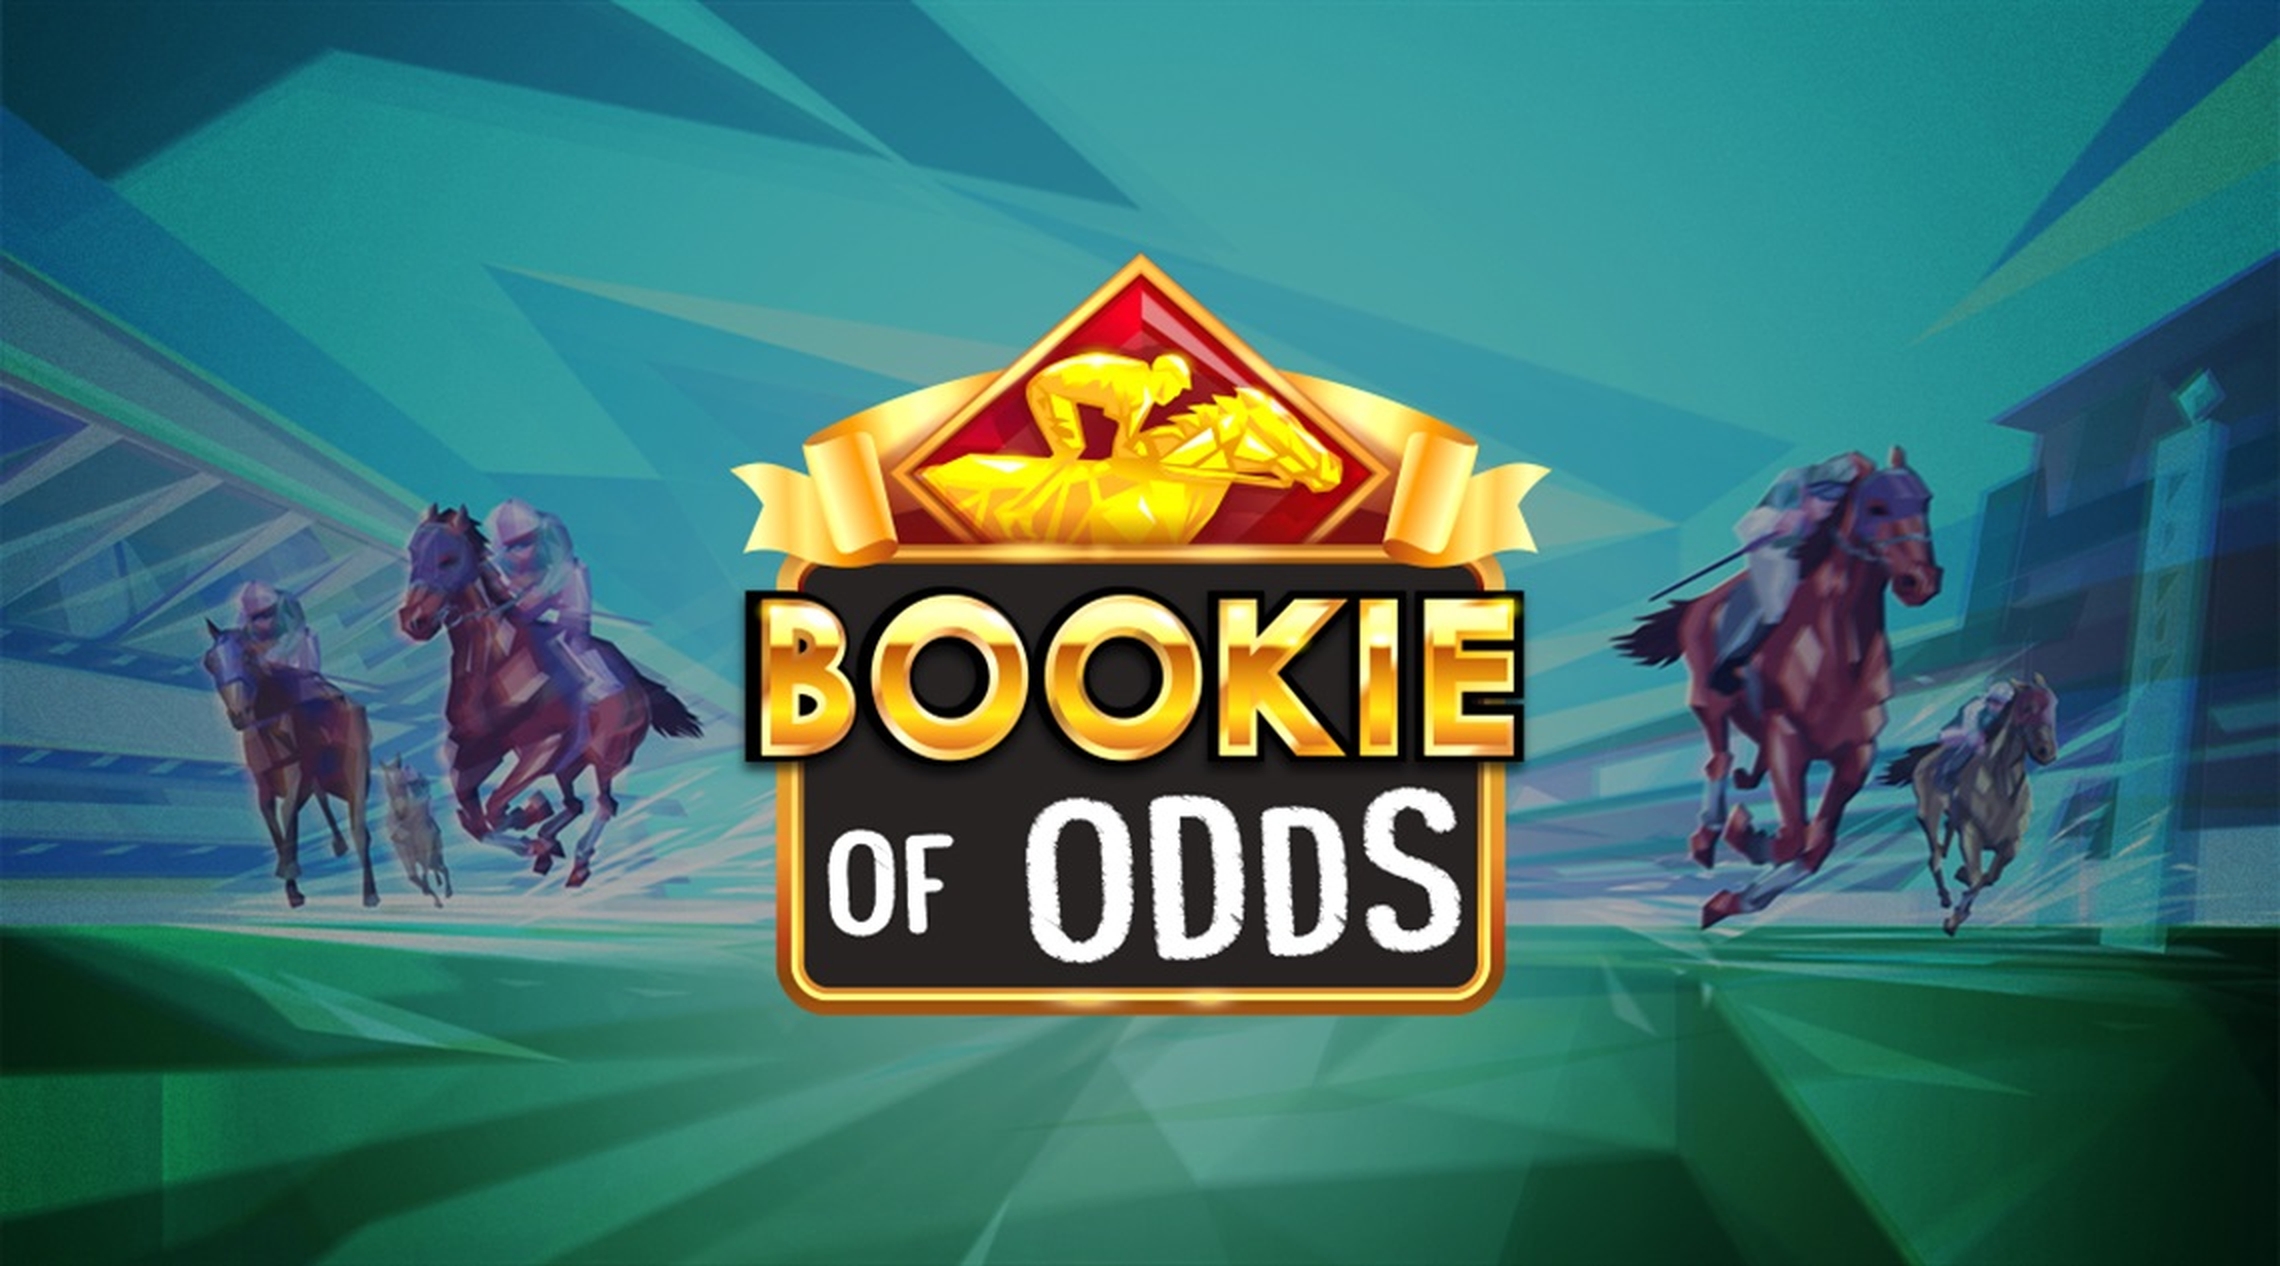 The Bookie of Odds Online Slot Demo Game by Triple Edge Studios